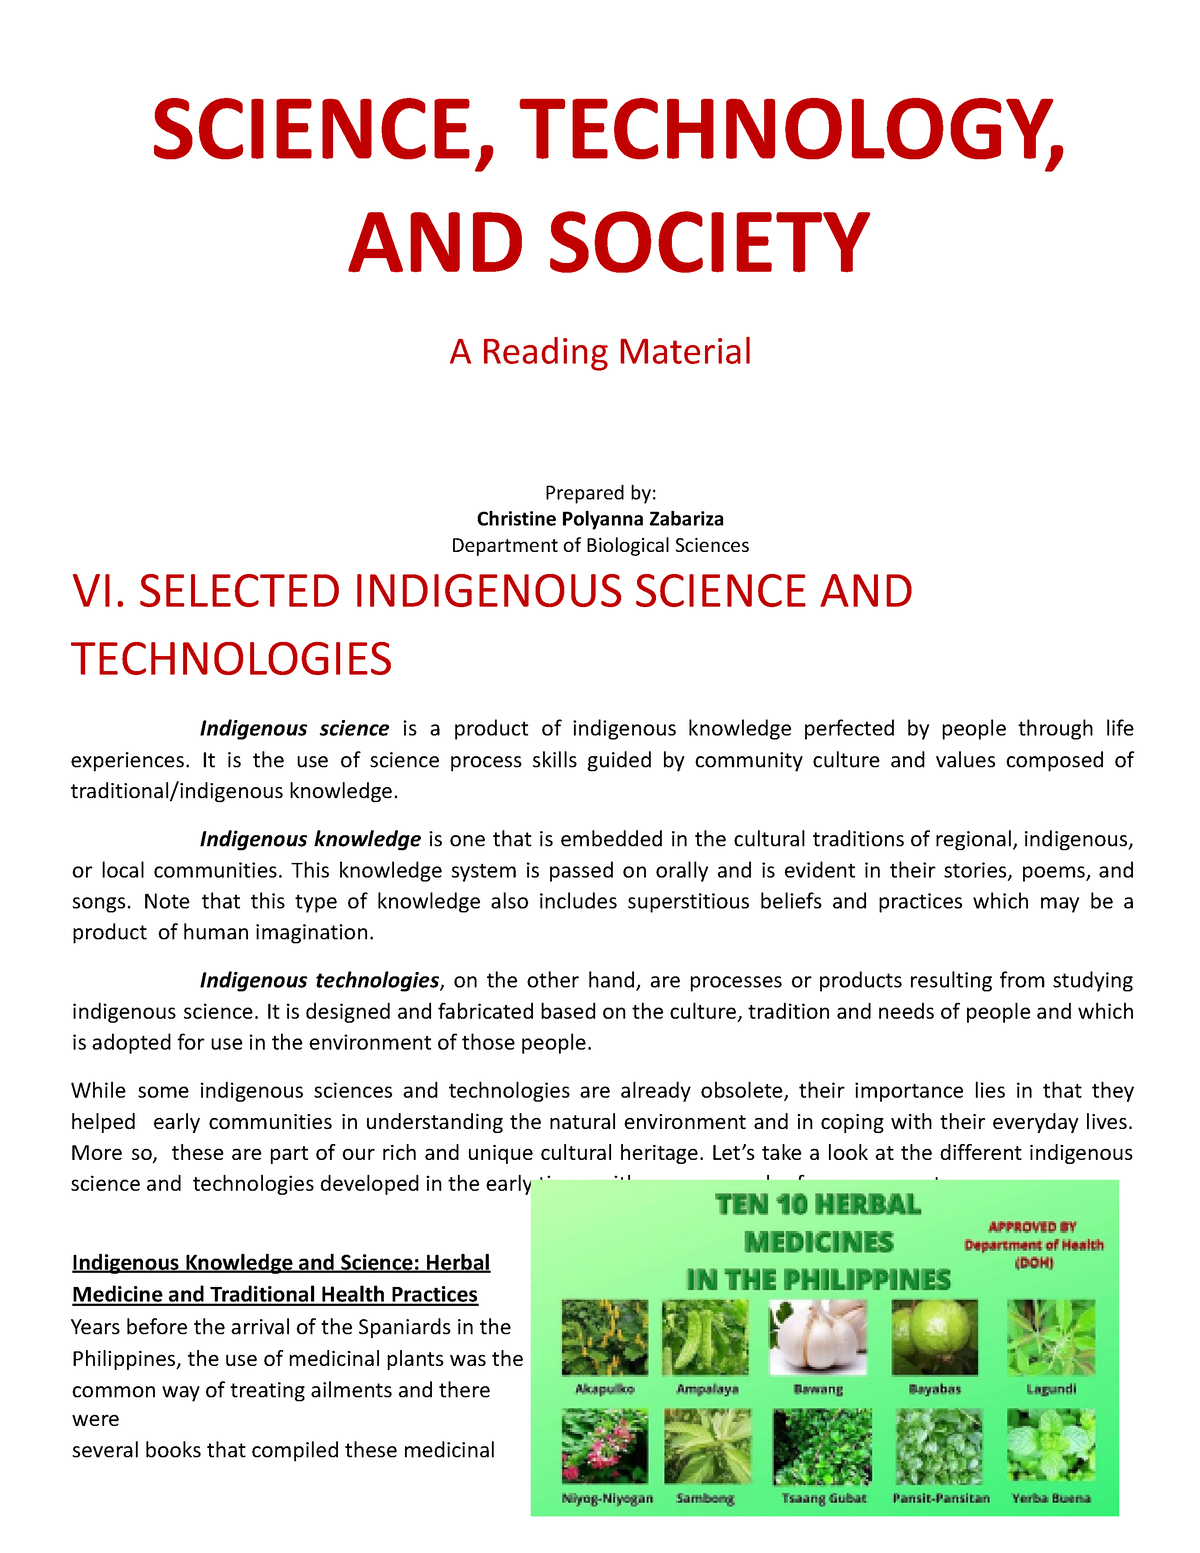 indigenous science and technology in the philippines essay